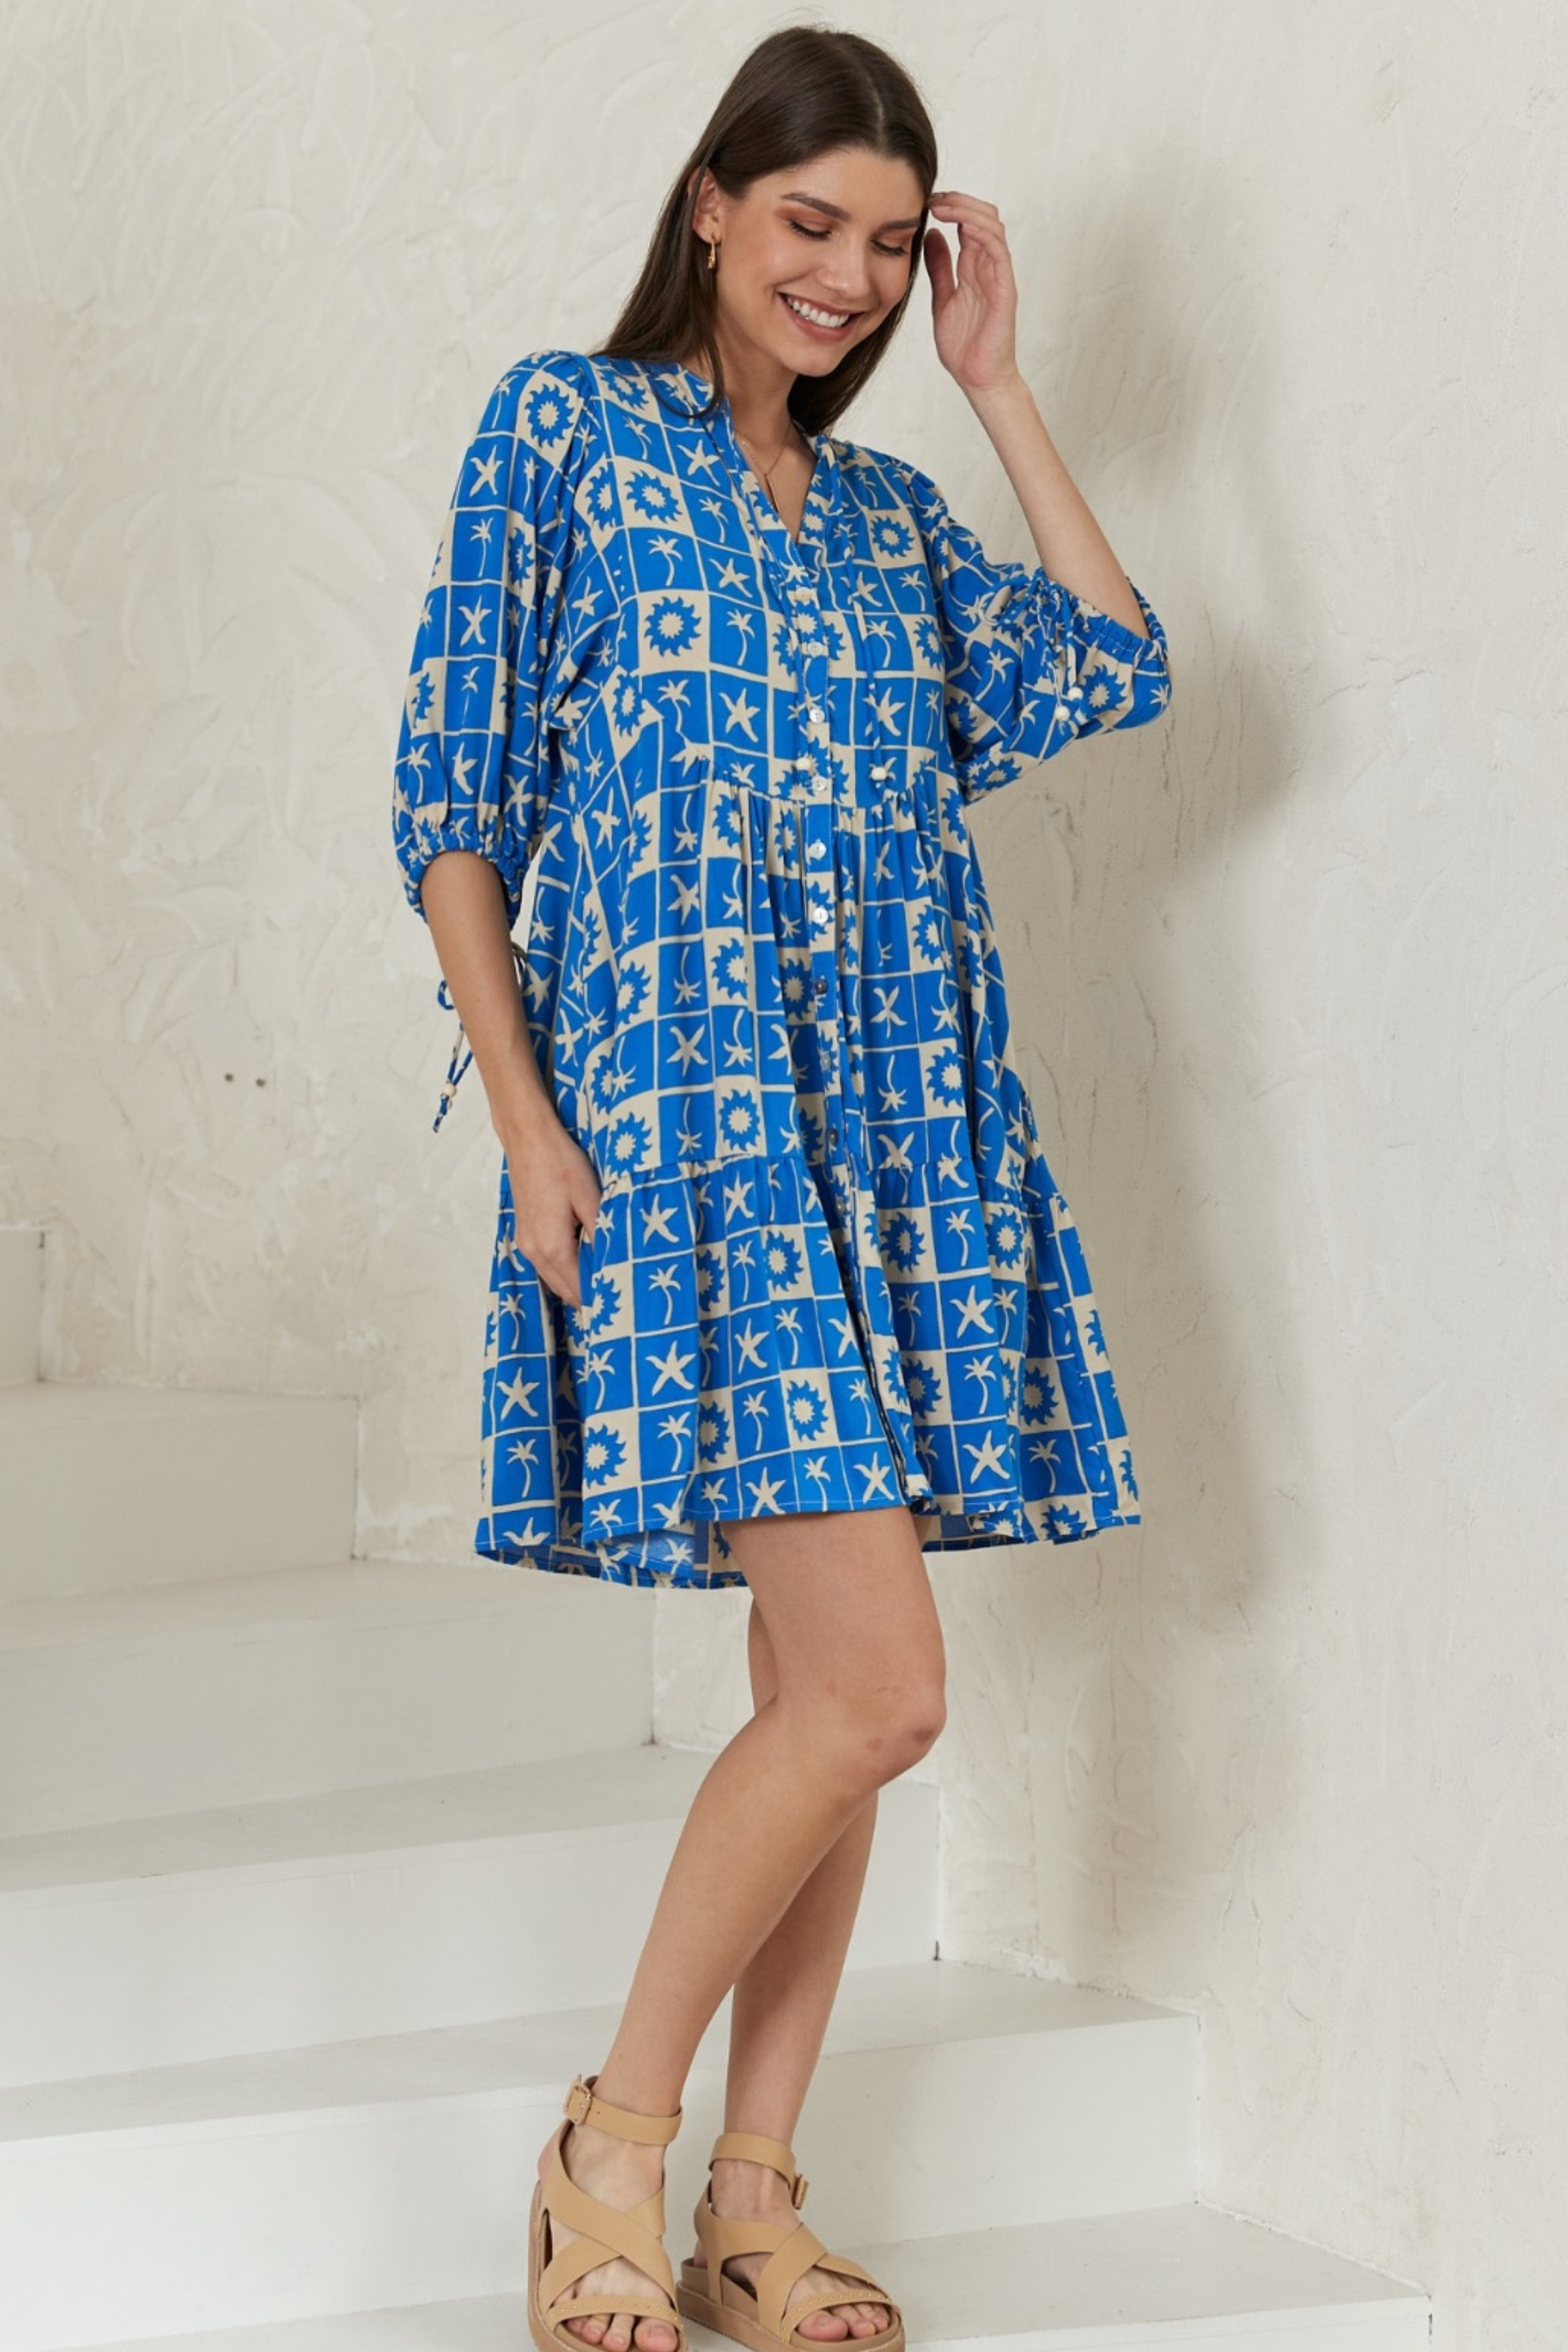 MARNI Dress in Blue and White